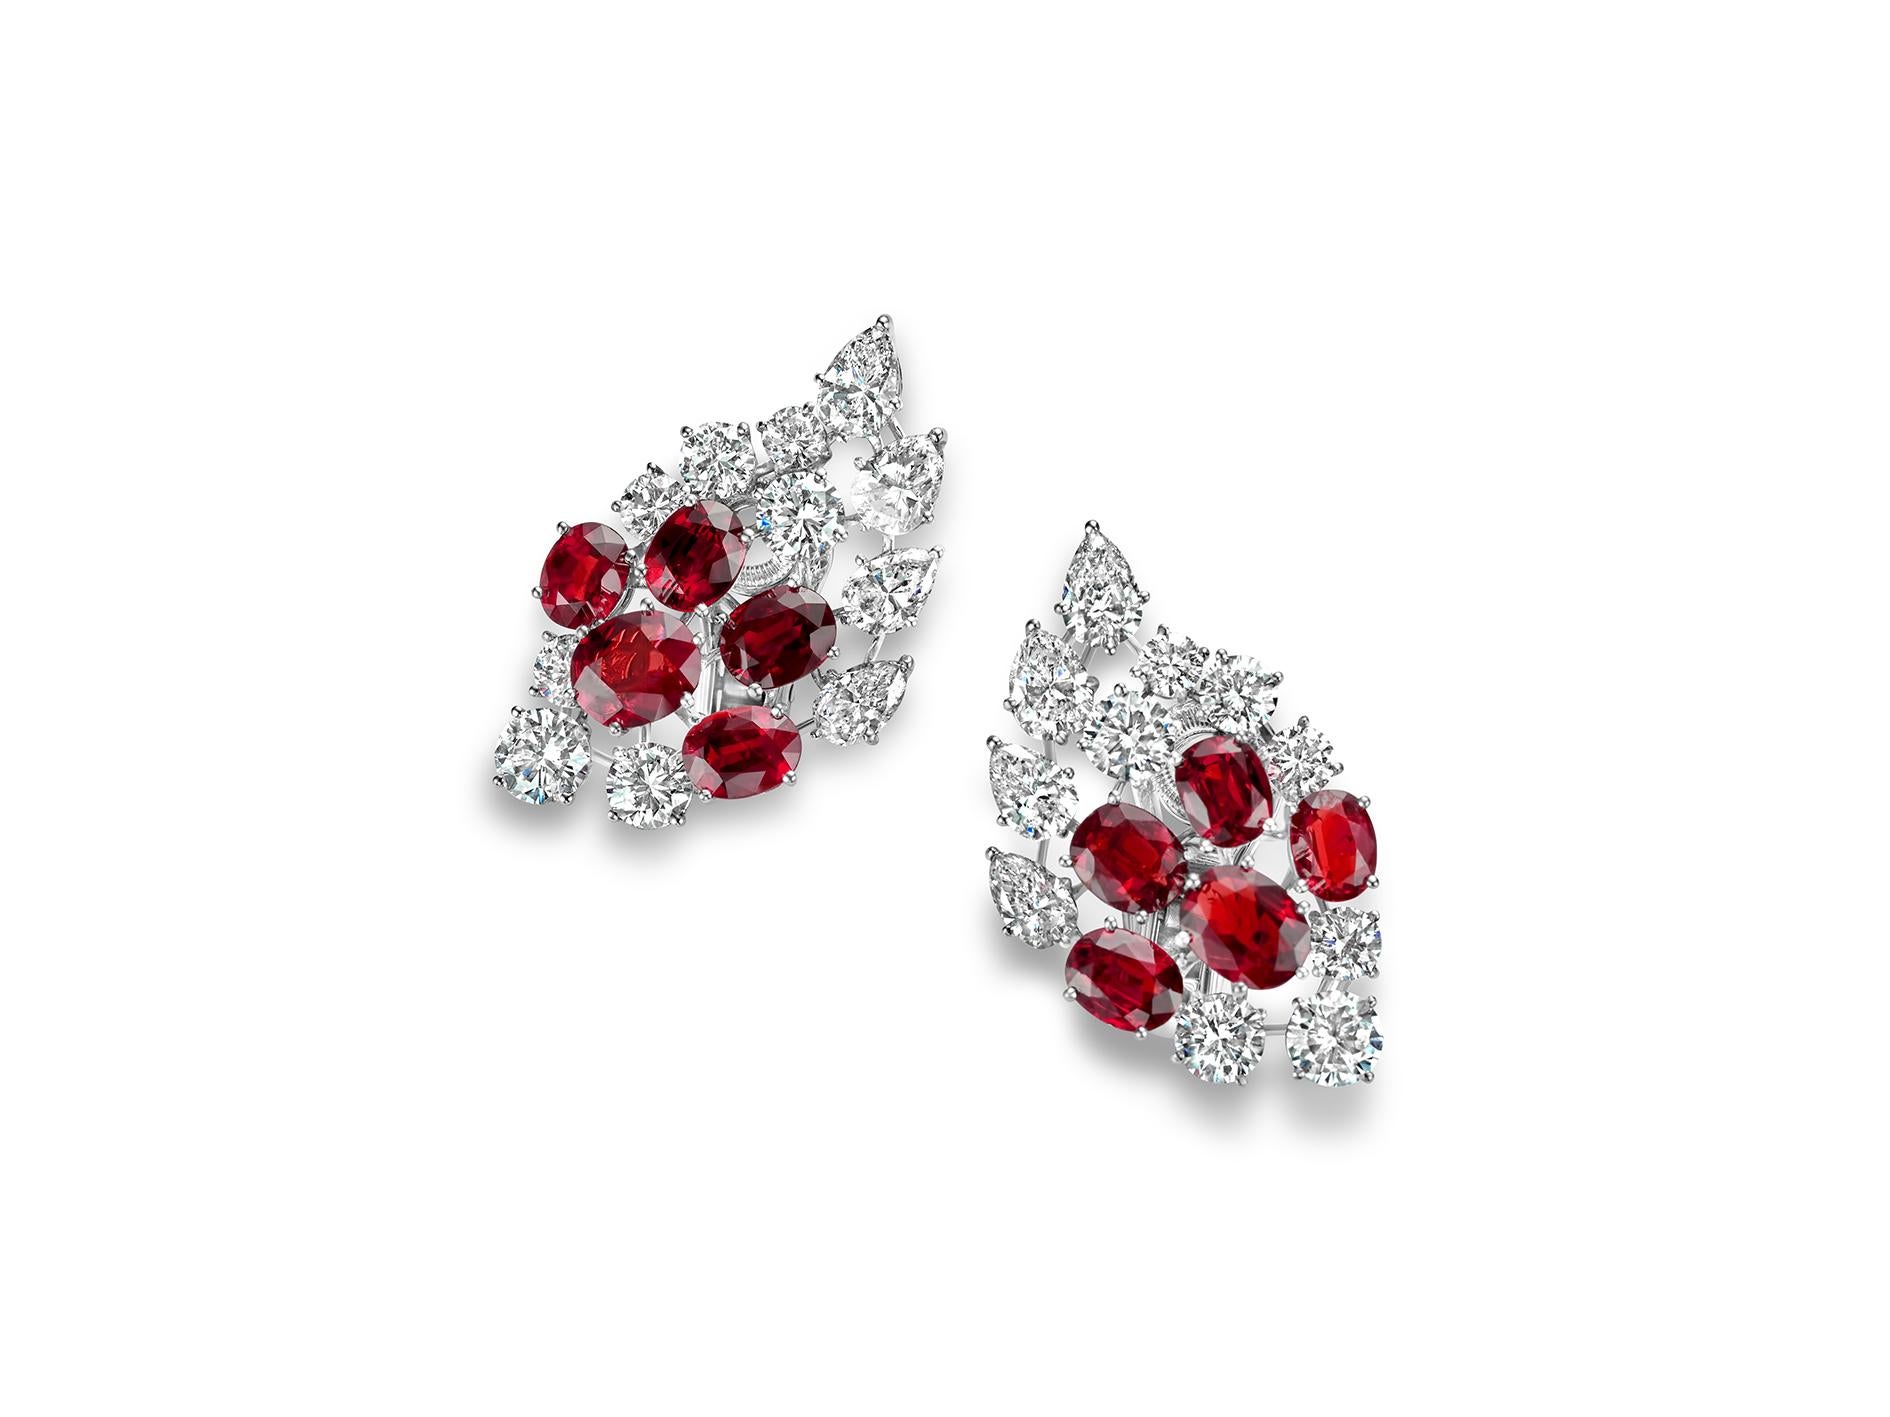 Magnificent Platinum Clip - On Earrings with 7ct Rubies CGL Certified, 6.8ct Diamonds , Estate His Majesty The Sultan Of Oman Qaboos Bin Said

Ruby: 10 Oval shaped, Intense red, Siam Rubies together 7 ct.
Comes with Carat Gem Lab certificate